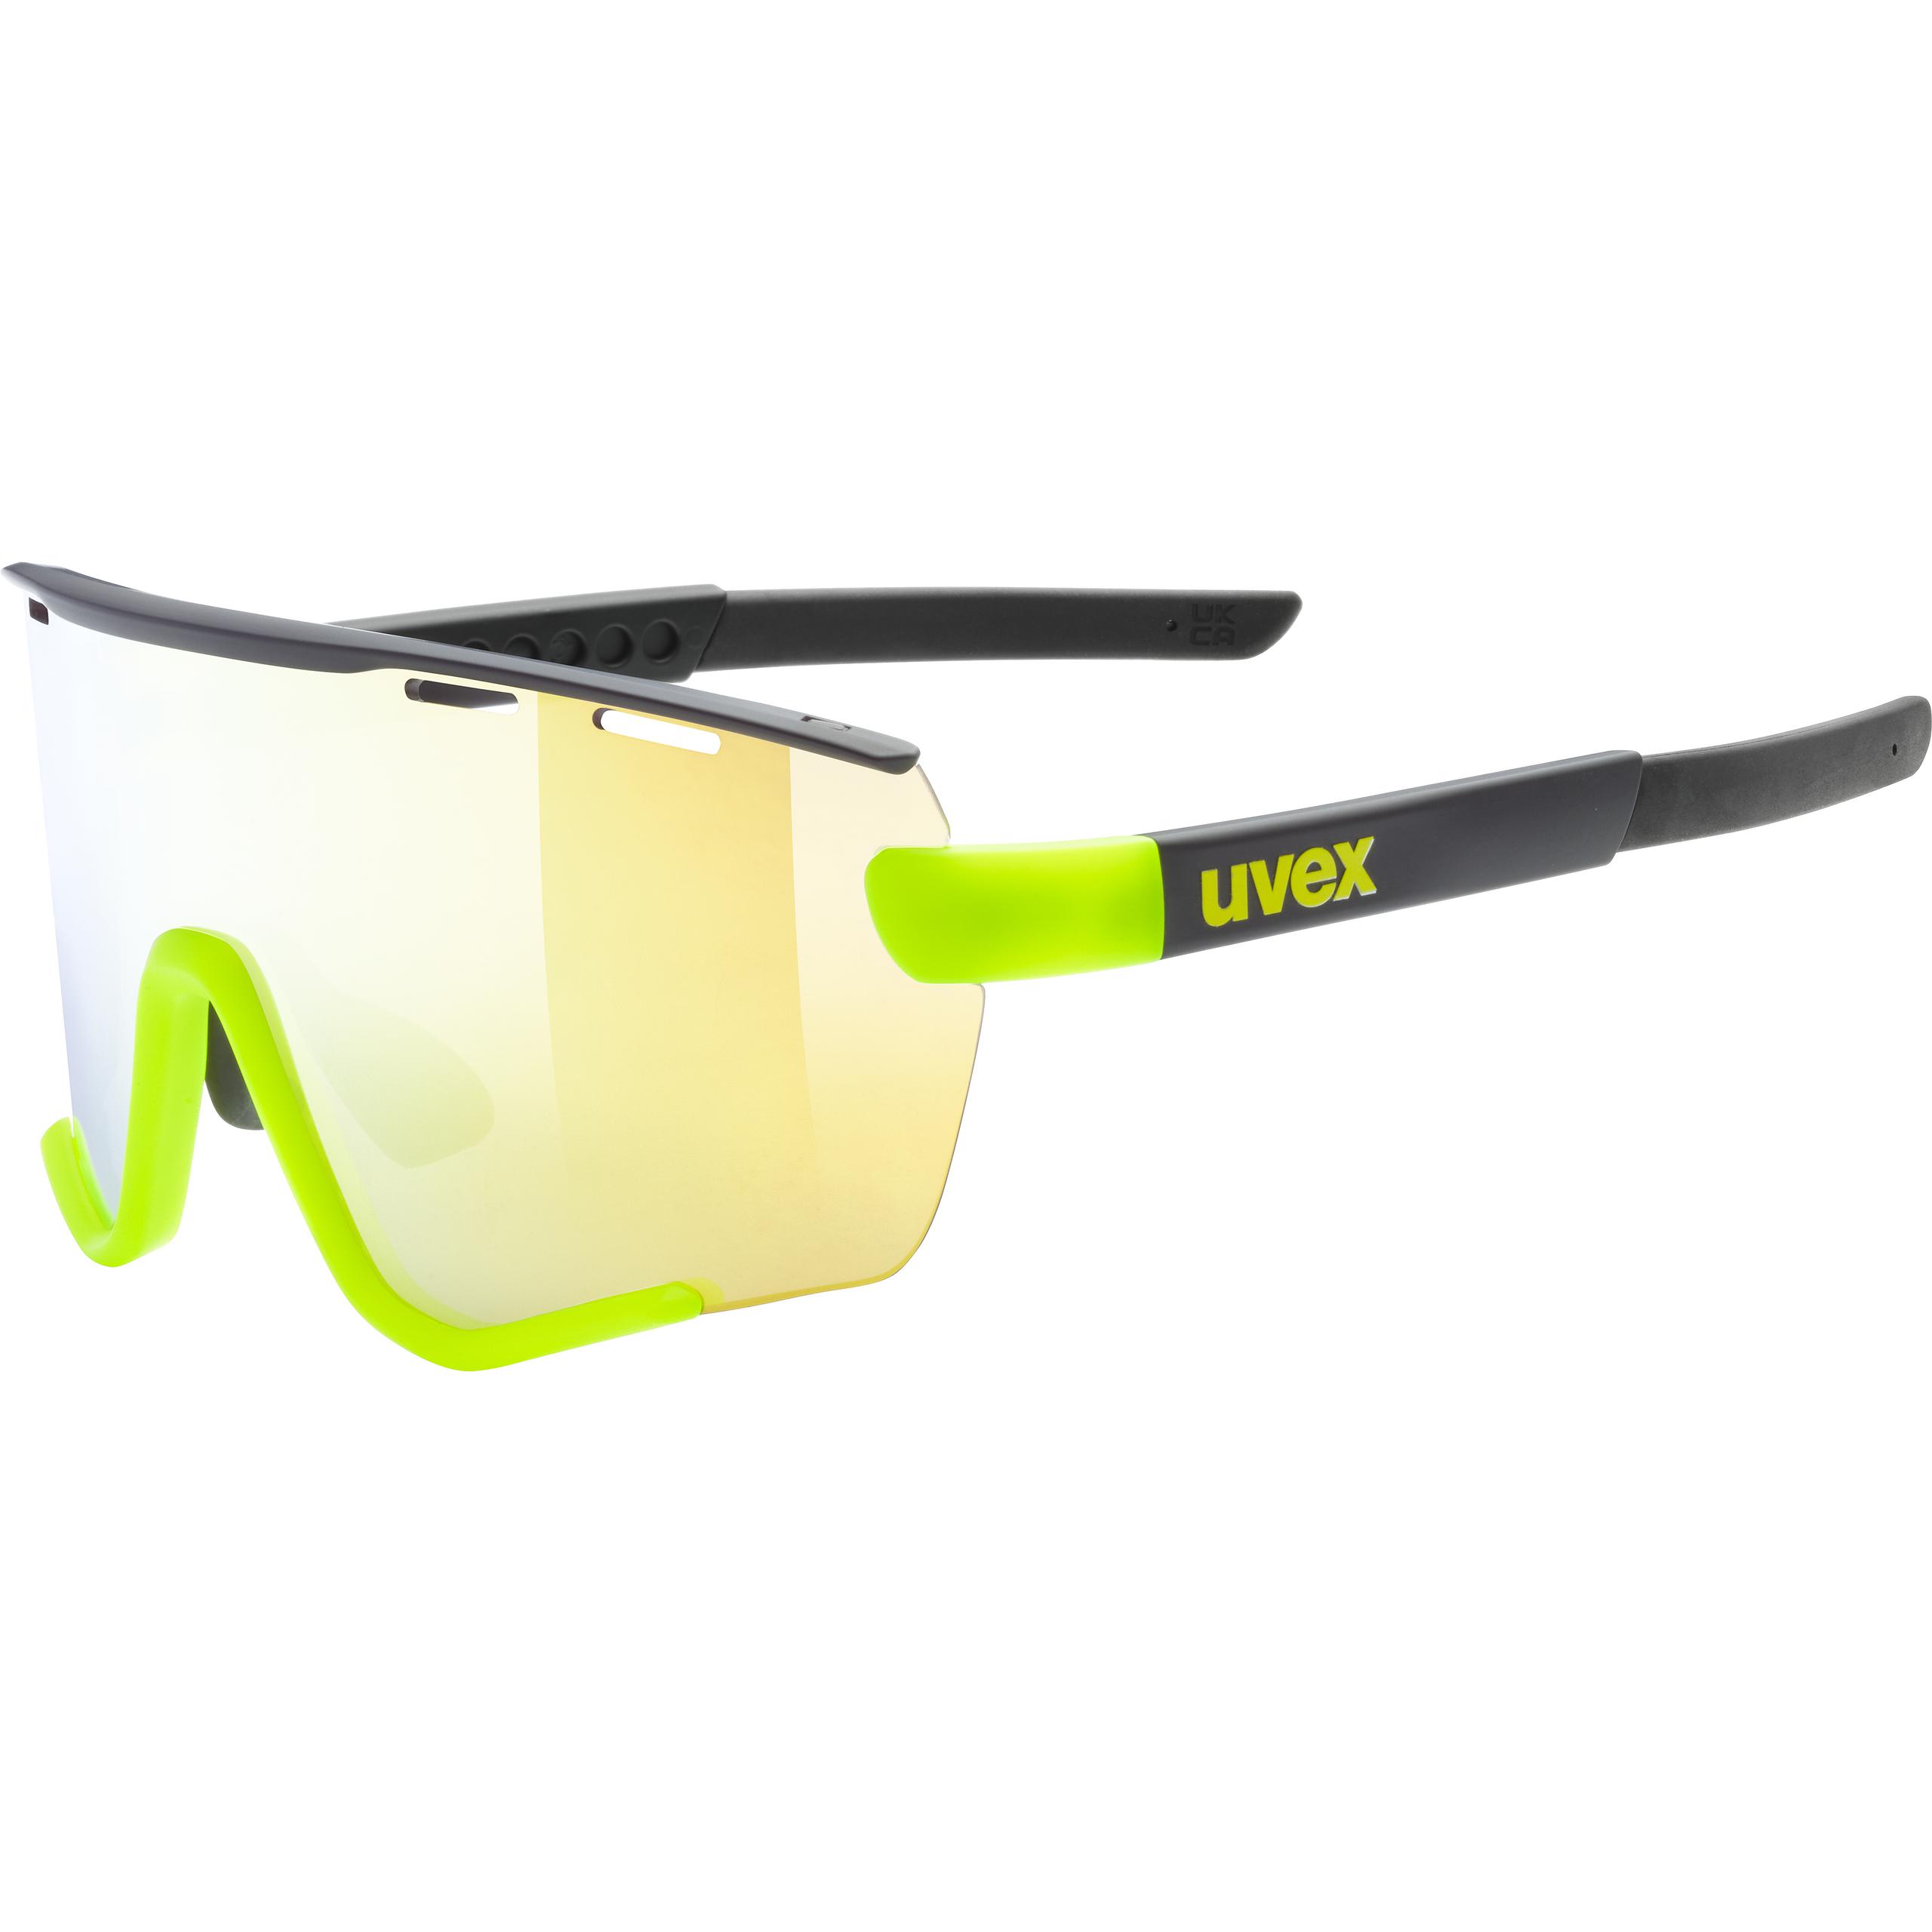 Sports Safety Glasses Uvex Racer Cycling Fishing Work 100% UV Protection 